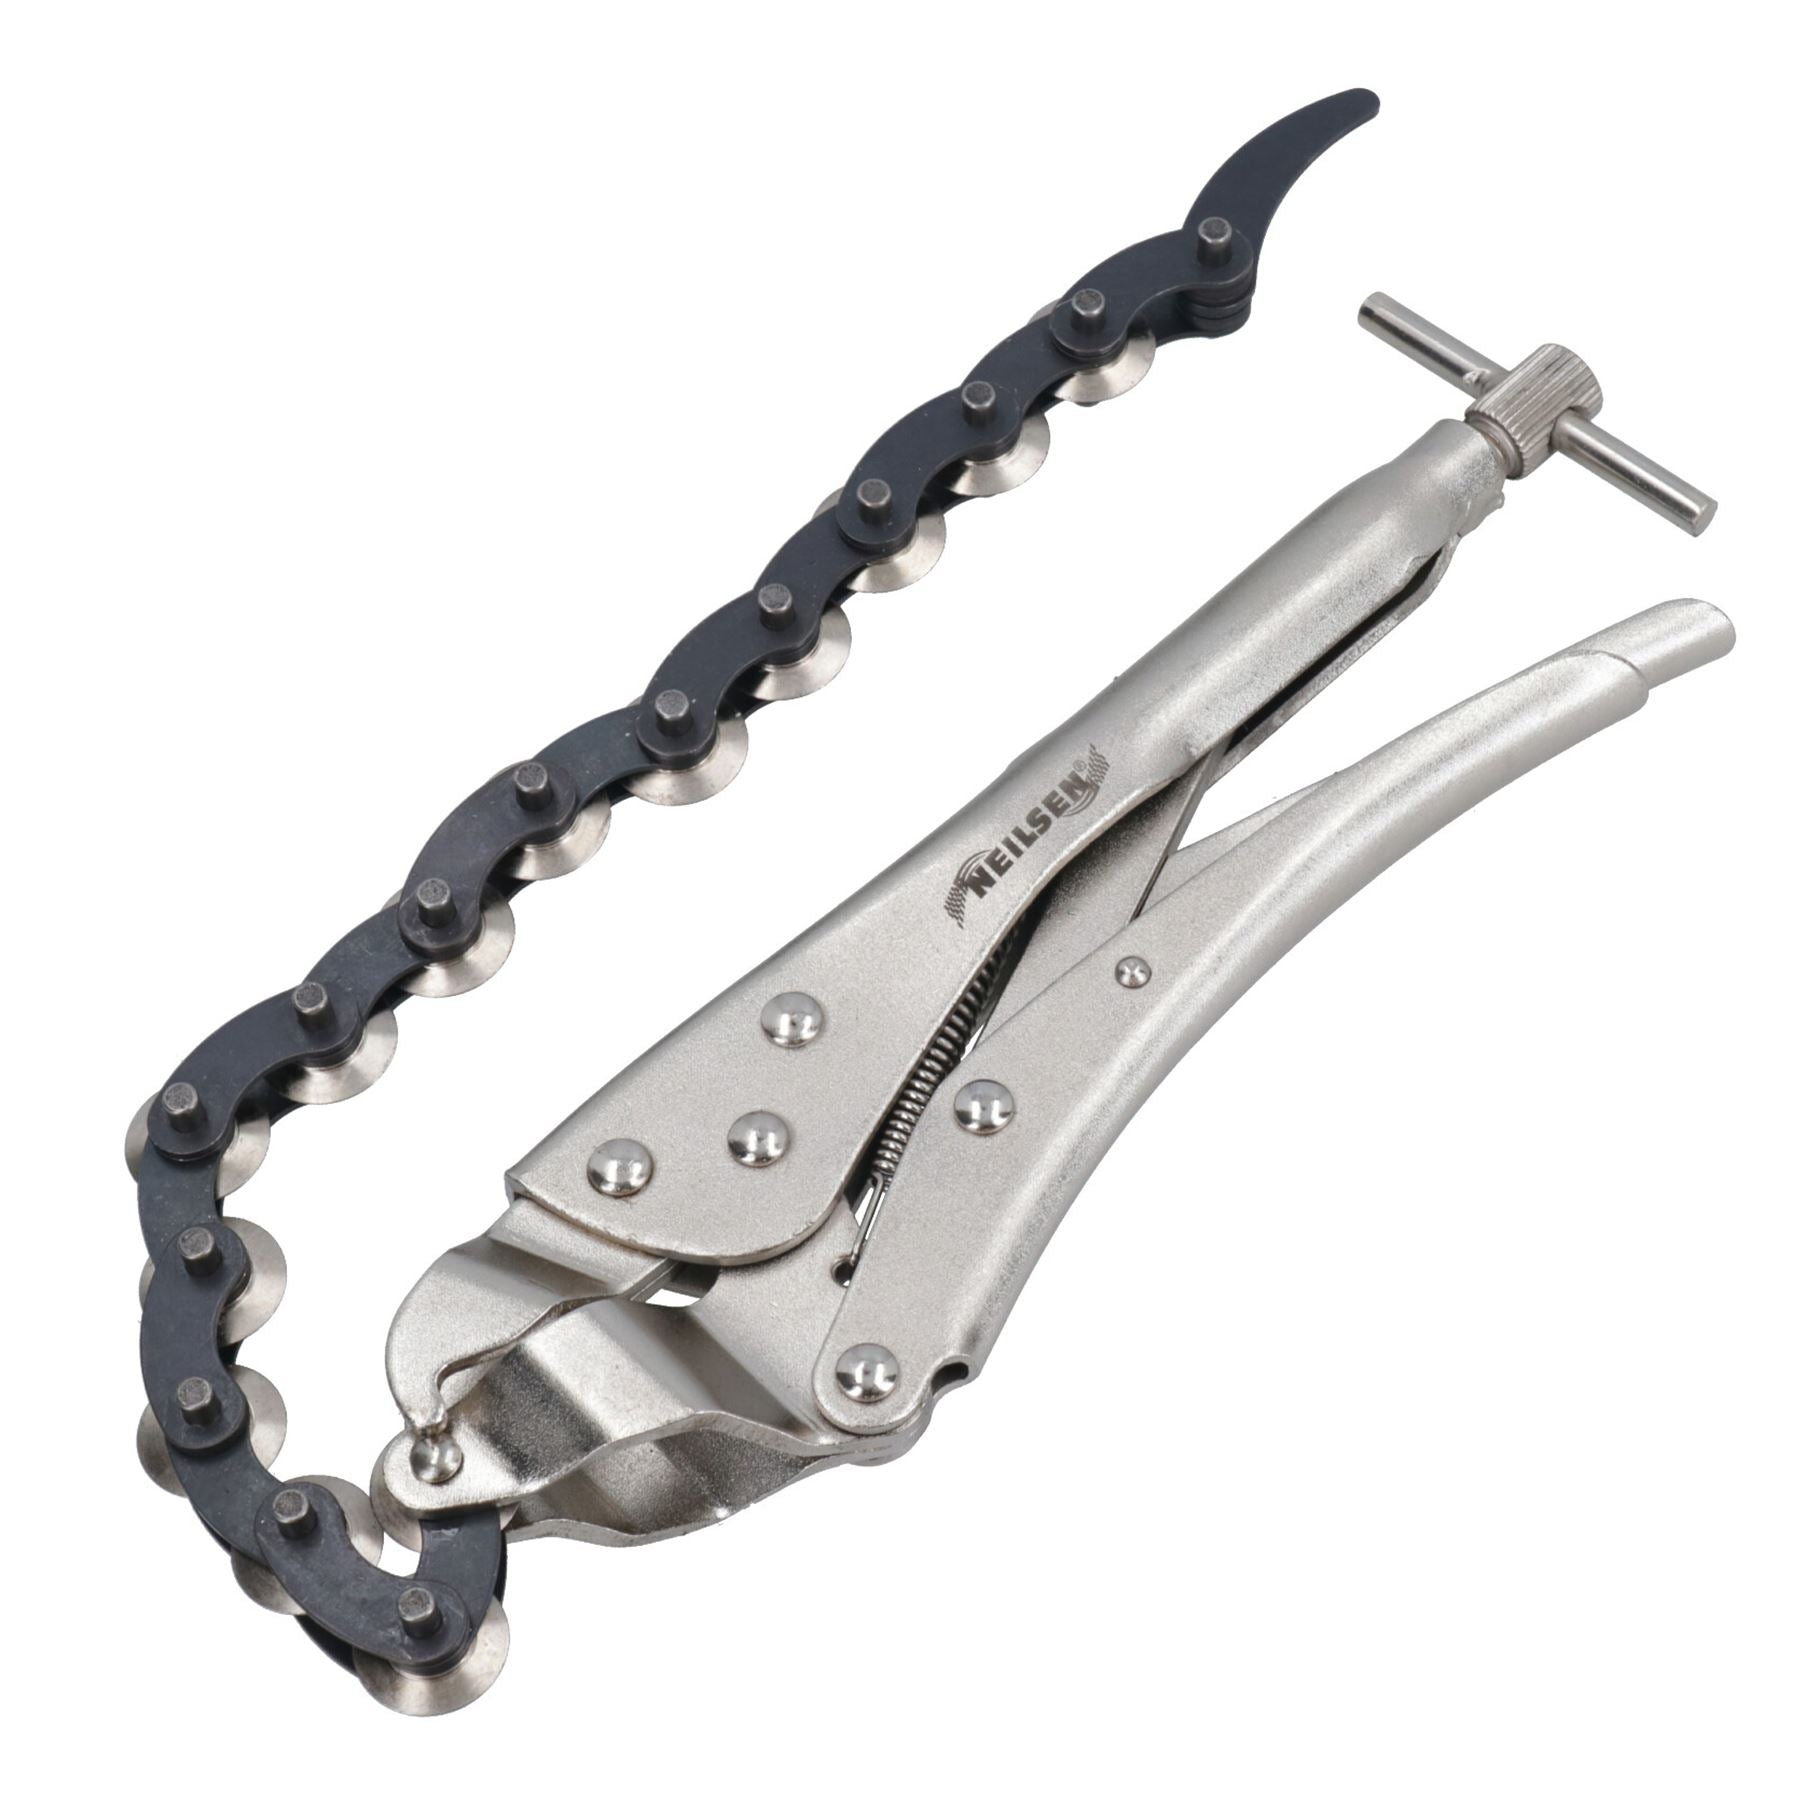 Chain Cutter For Cutting Metal Exhaust Pipes Tailpipes 19mm – 83mm In Diameter